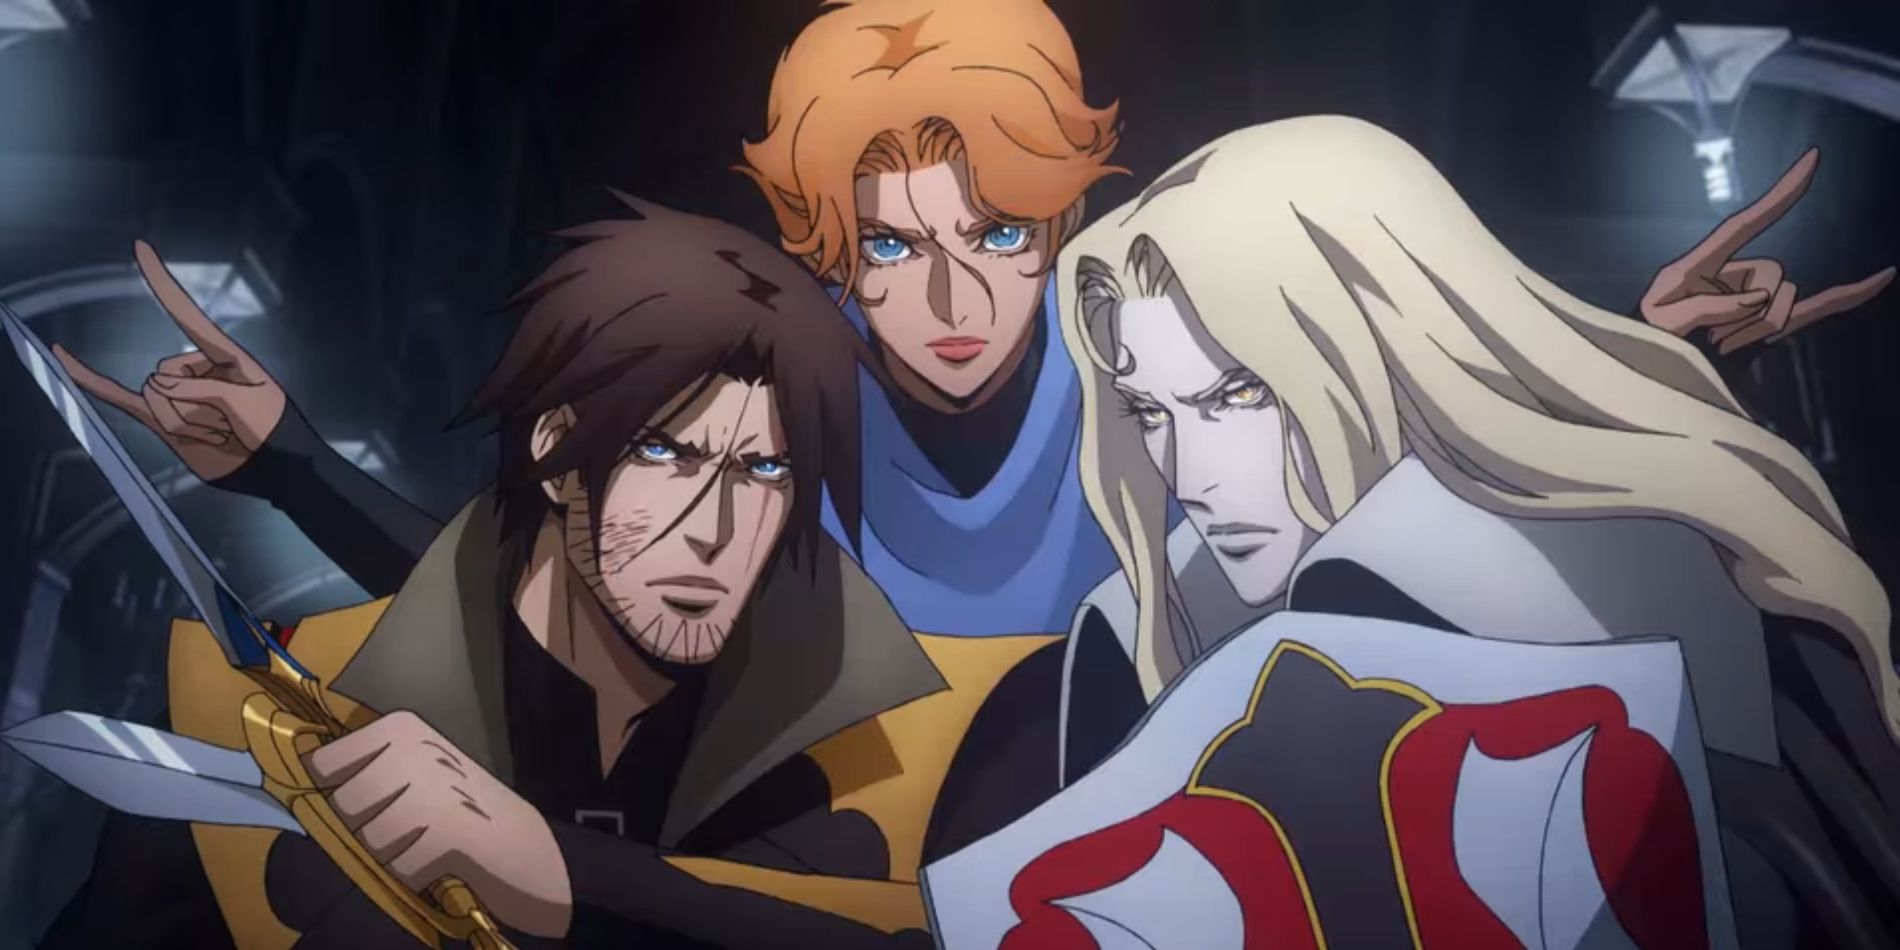 Trevor, Sypha, and Adrian in Castlevania season 4 episode The Endings